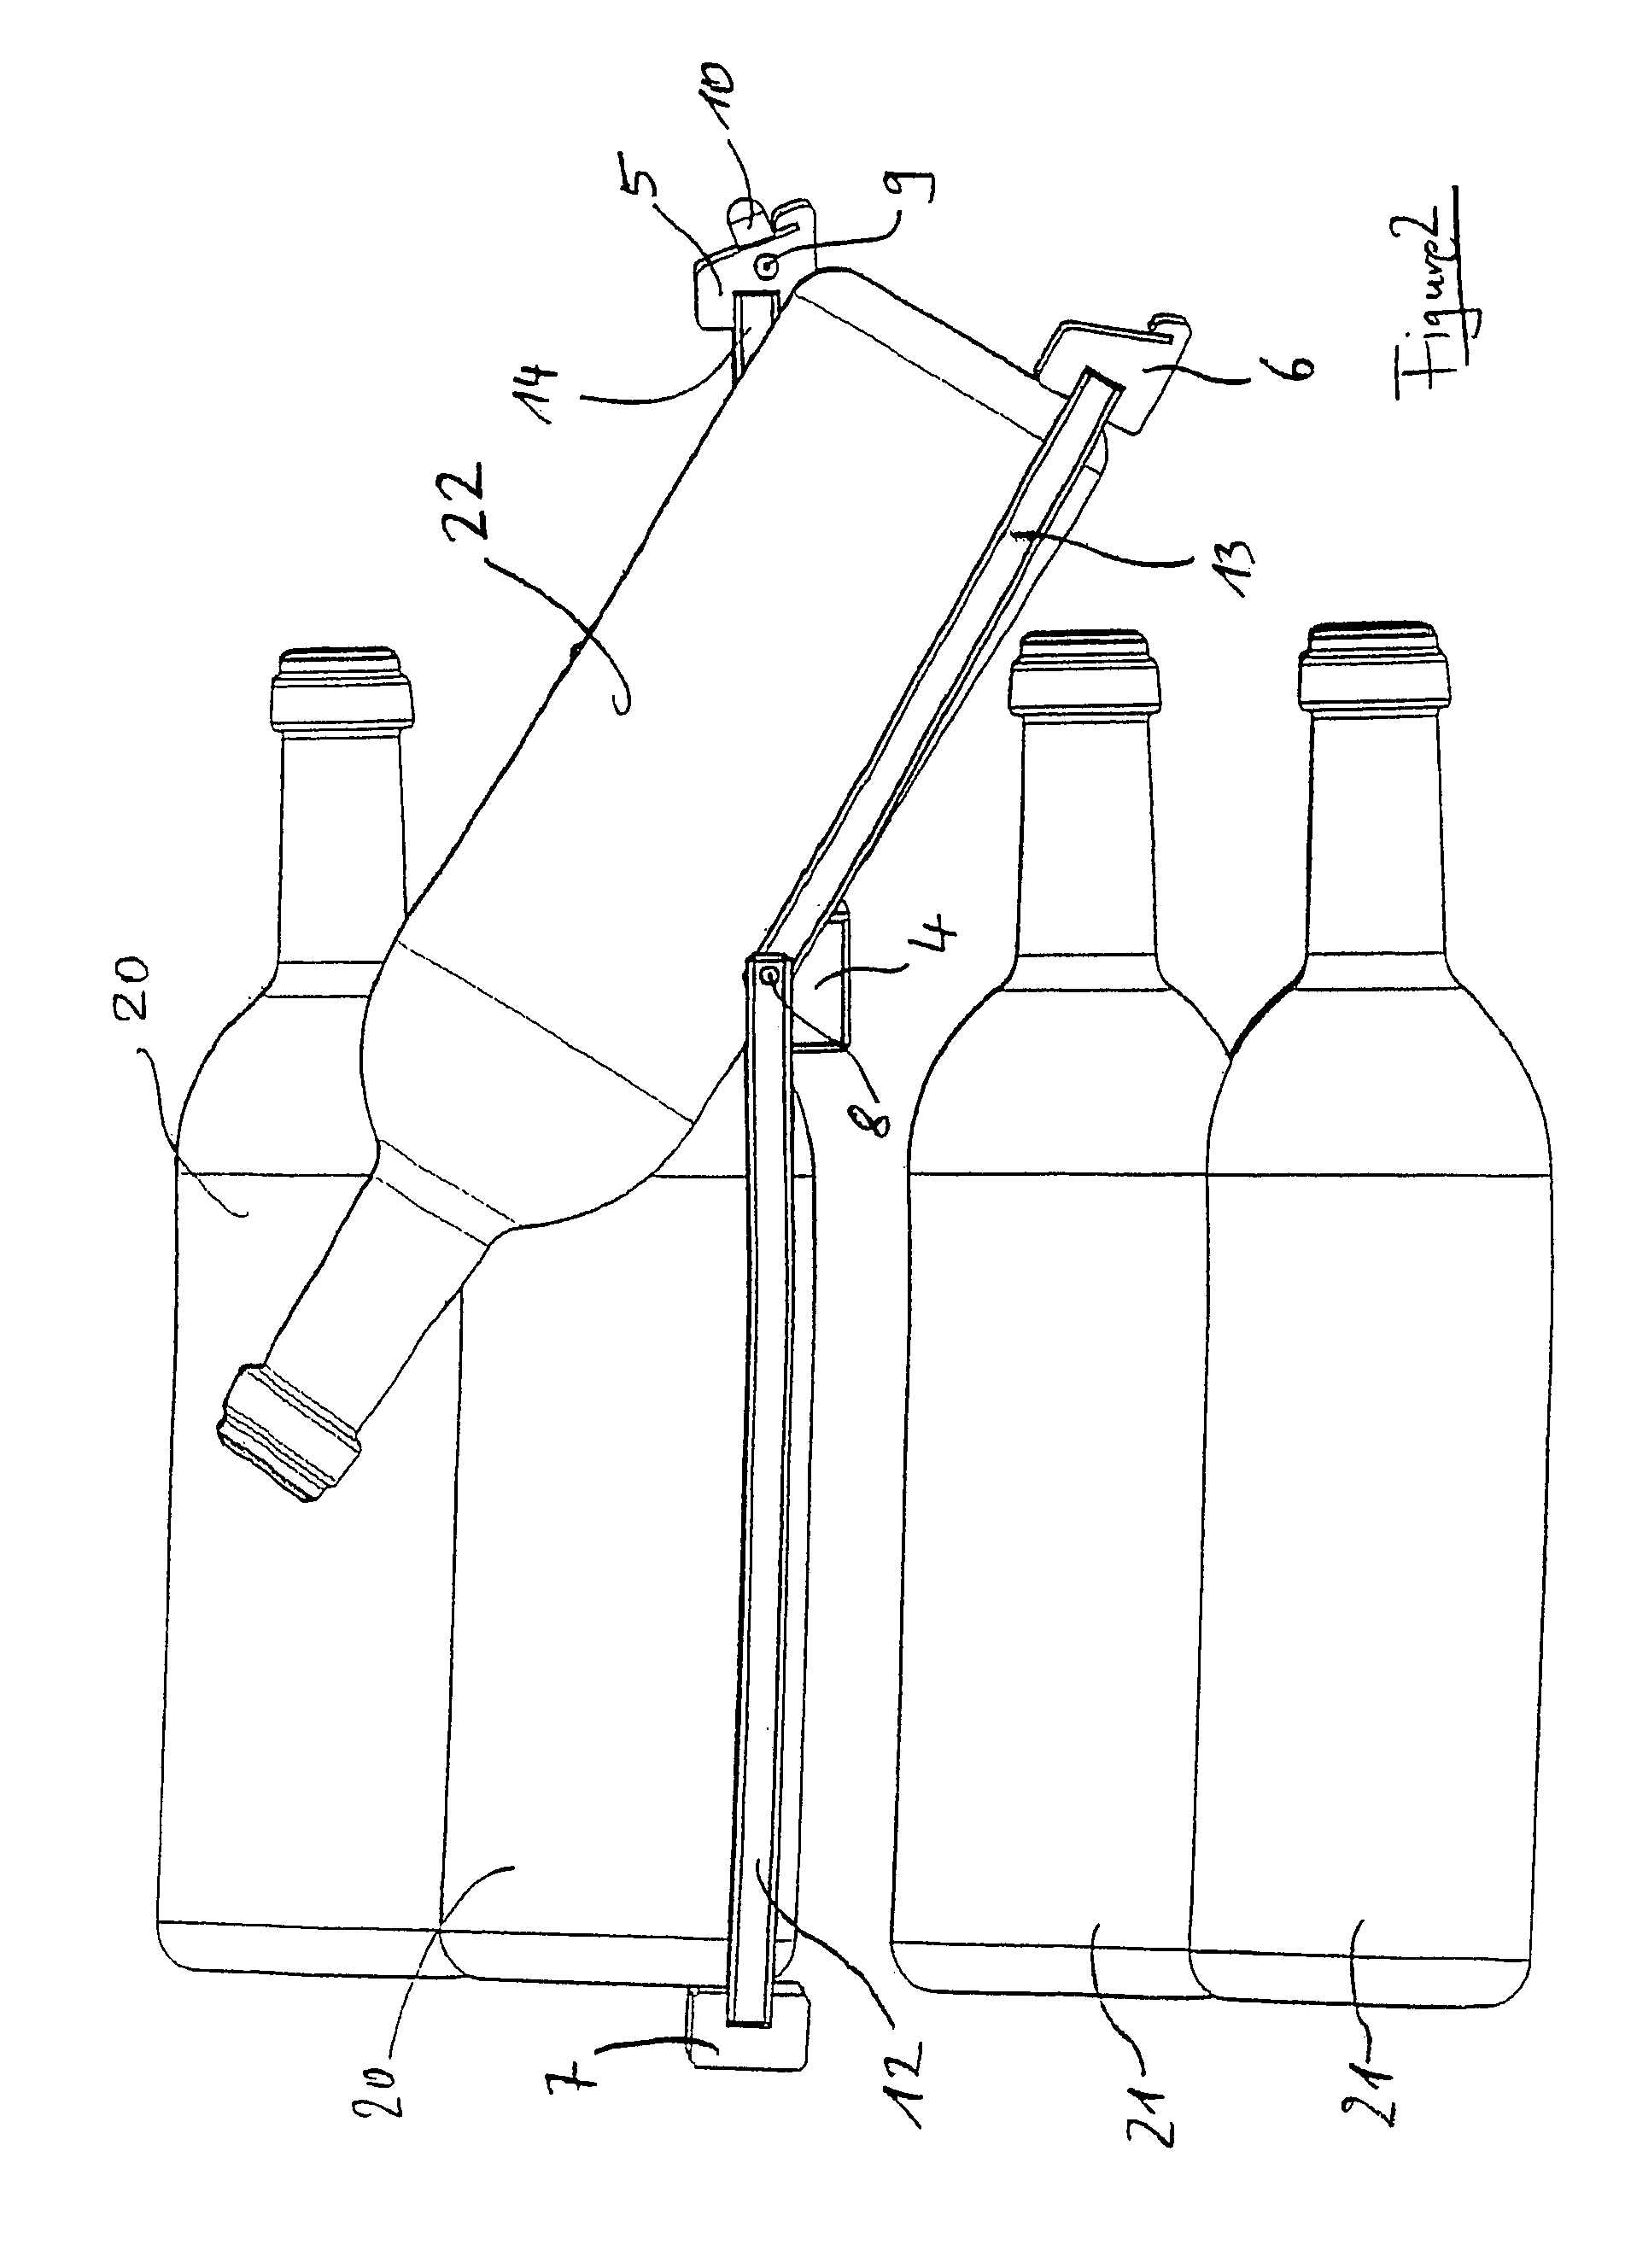 Bottle rack and a bottle storage device